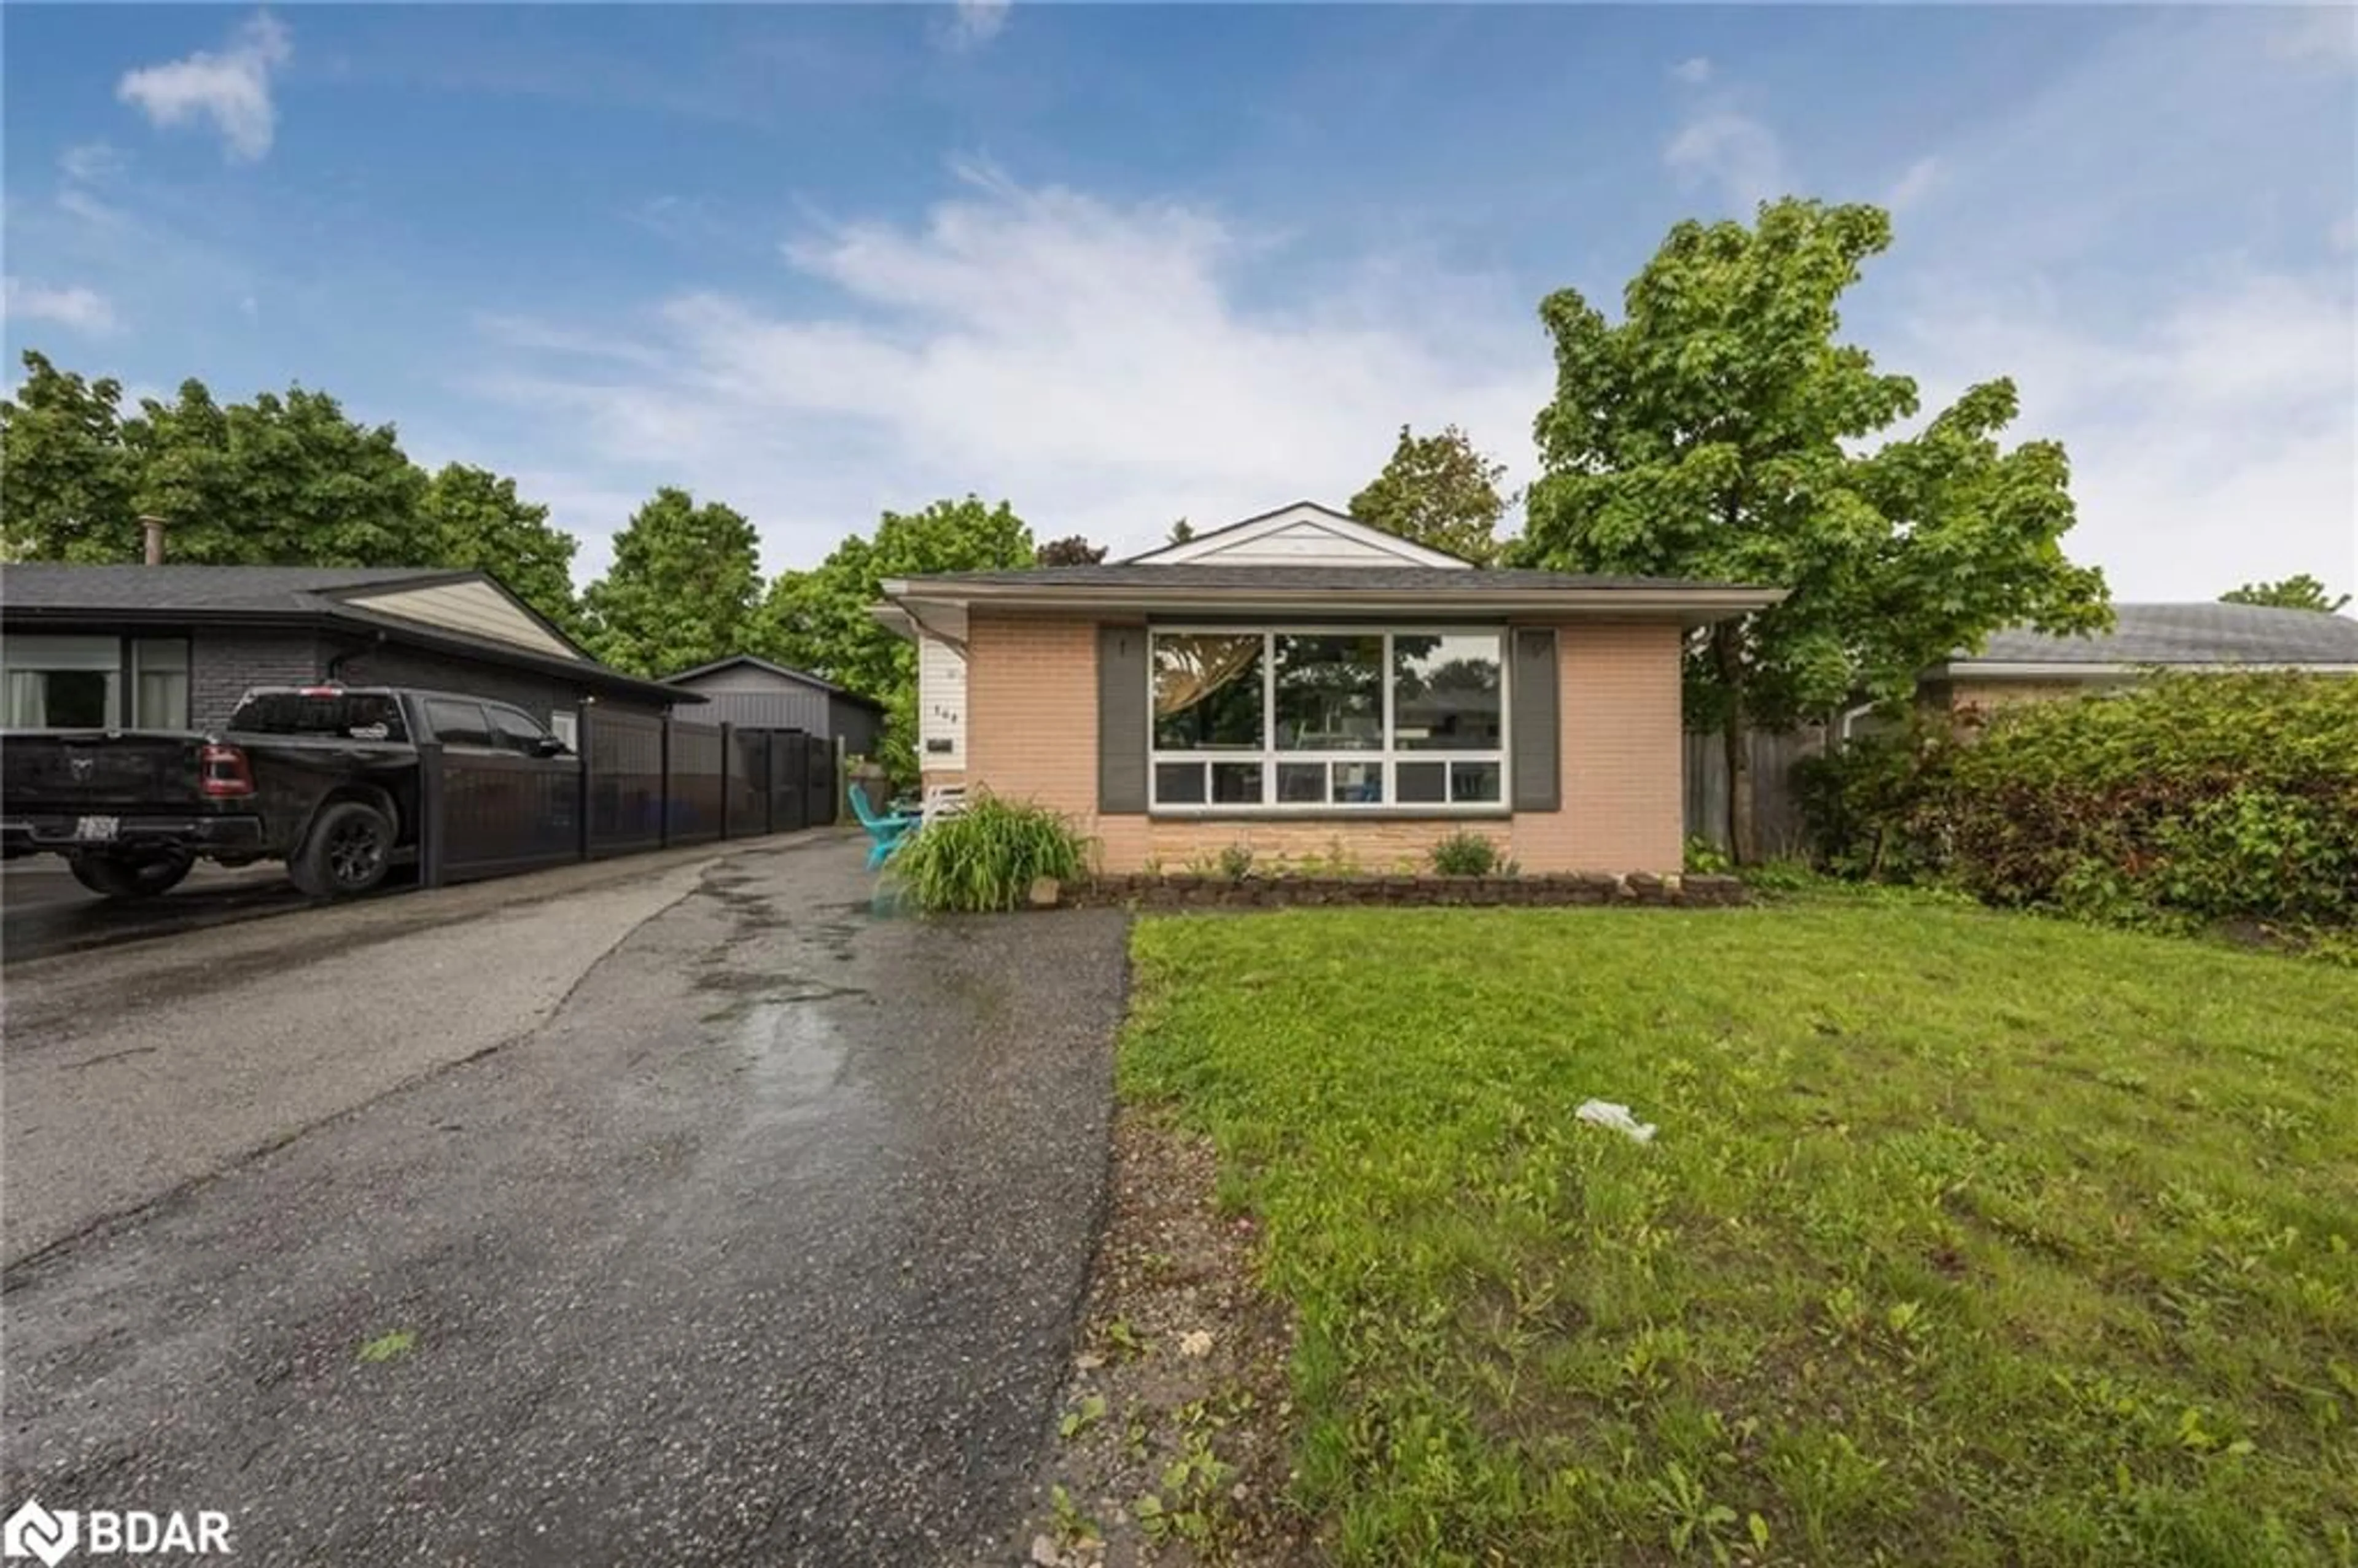 Frontside or backside of a home for 104 Daphne Cres #1, 2, 3, Barrie Ontario L4M 2Z1